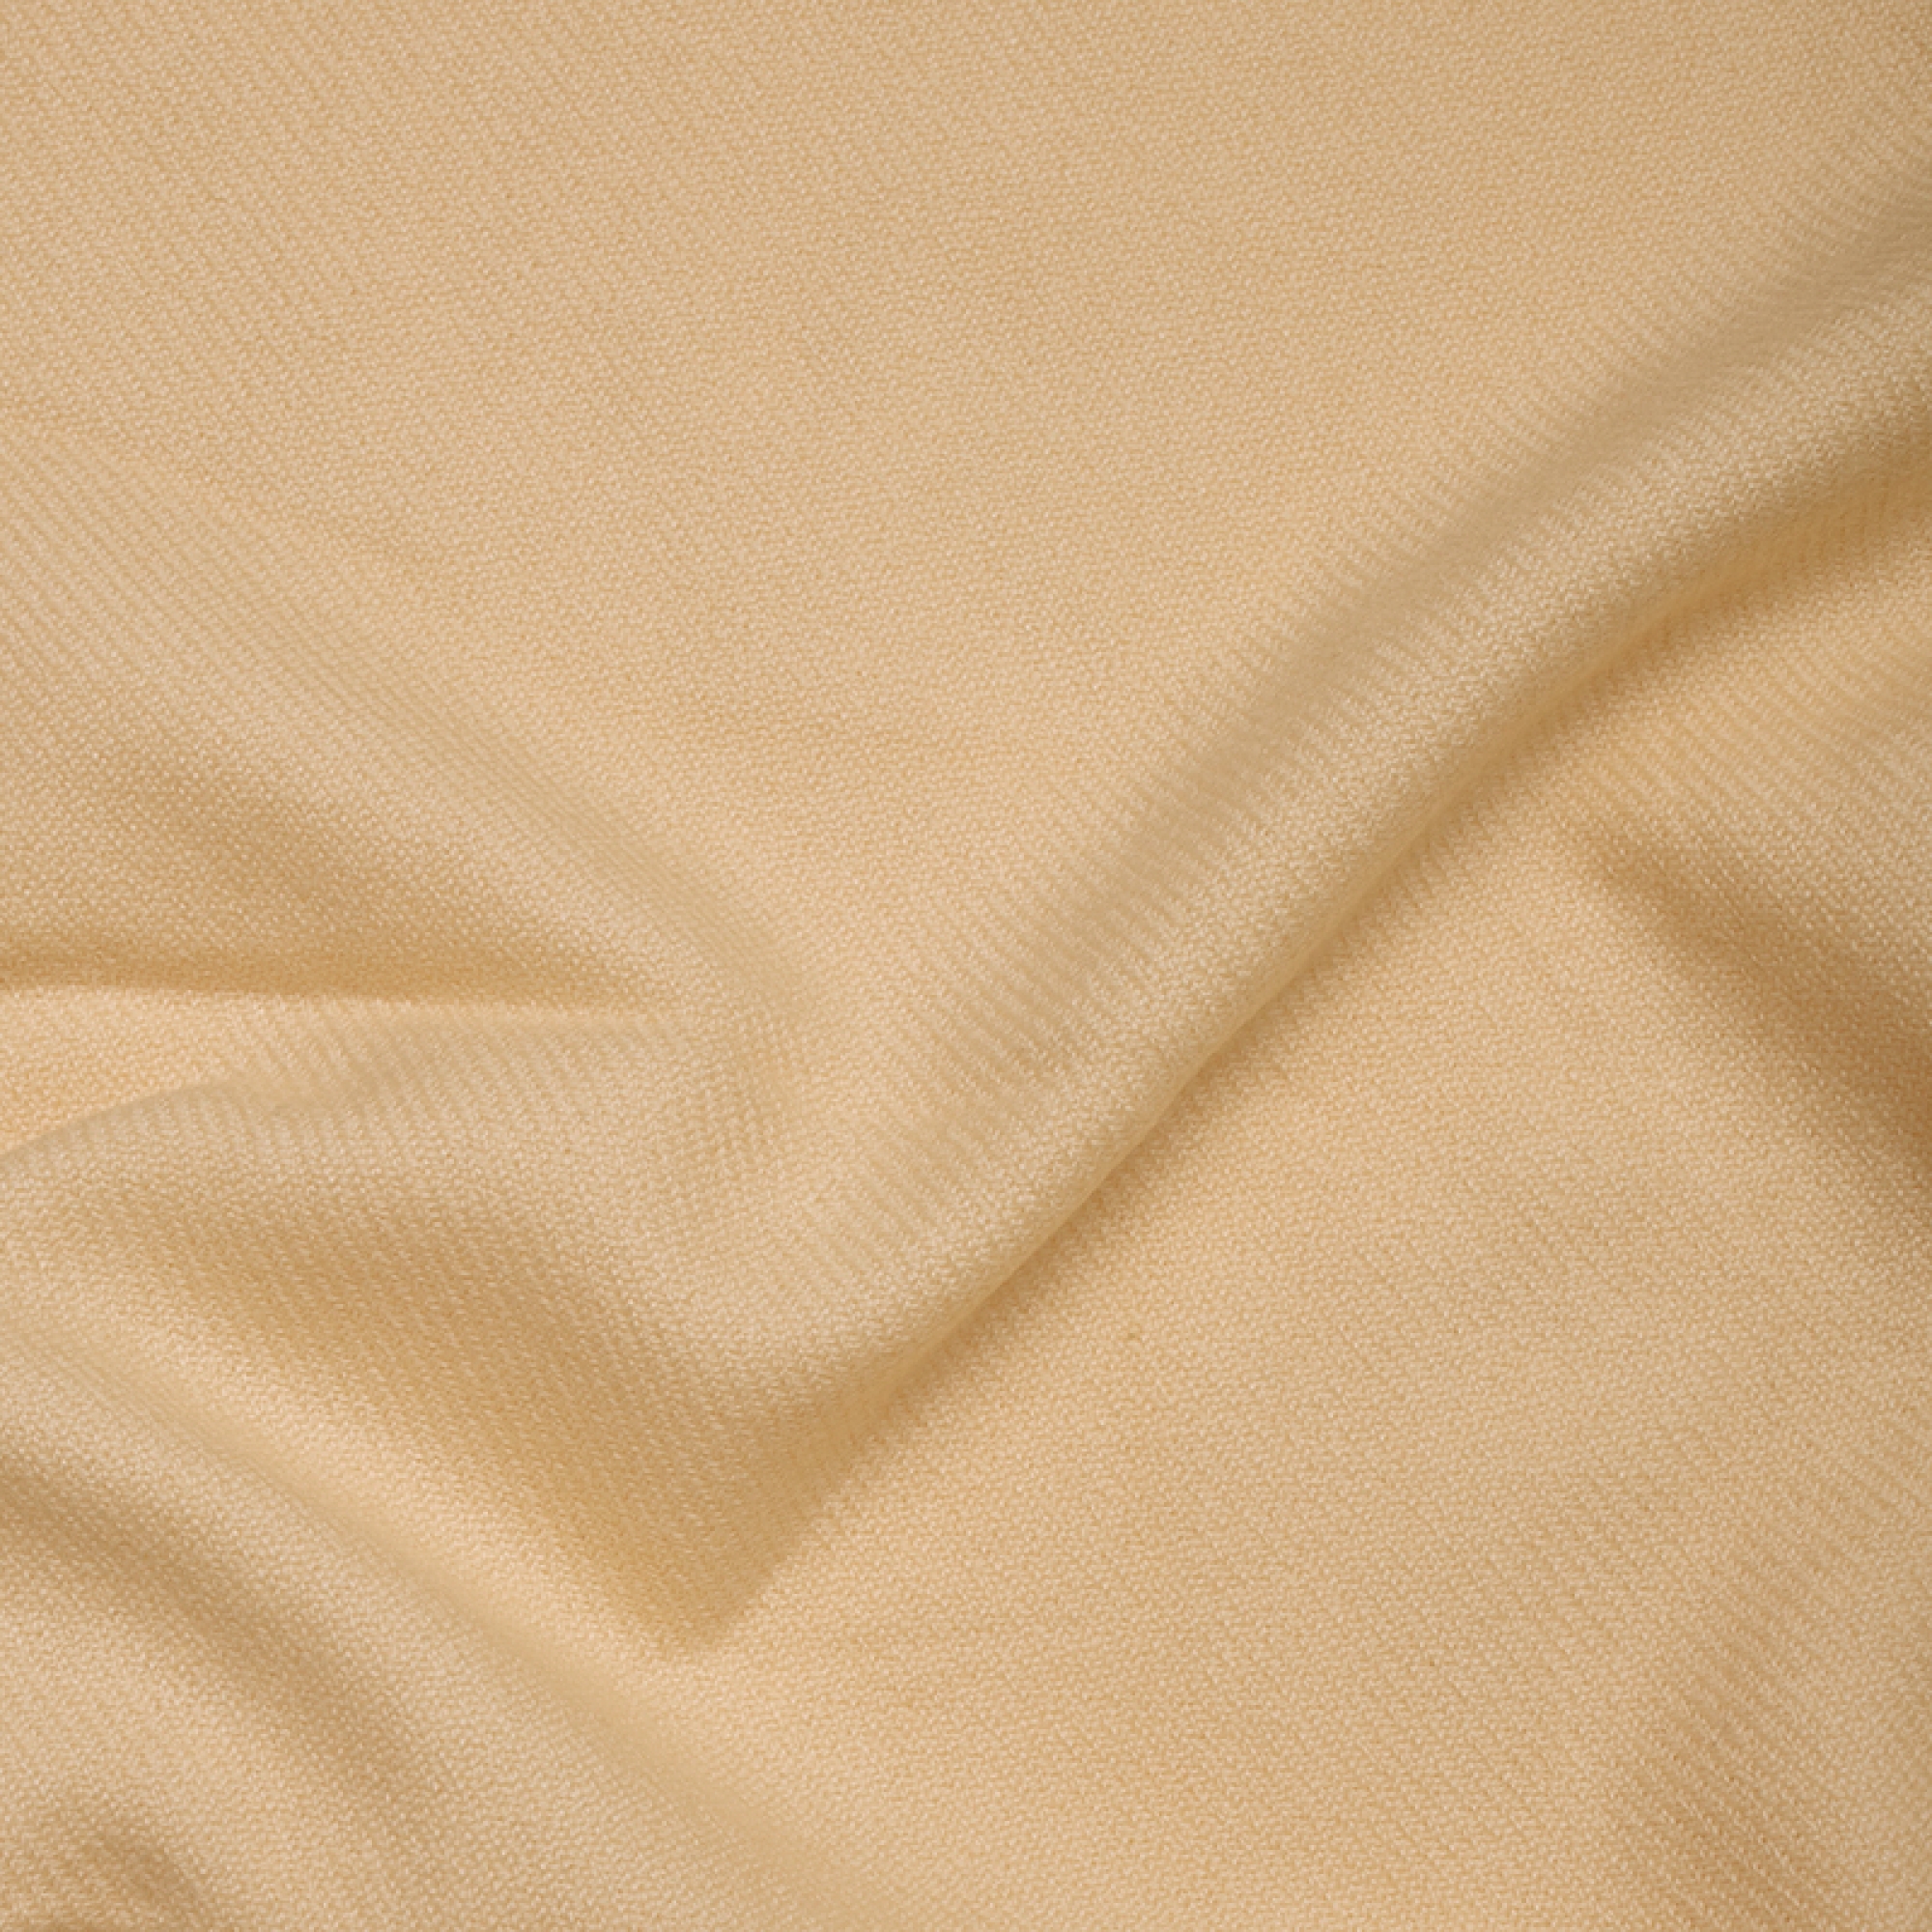 Cashmere uomo cocooning toodoo plain l 220 x 220 champagne 220x220cm